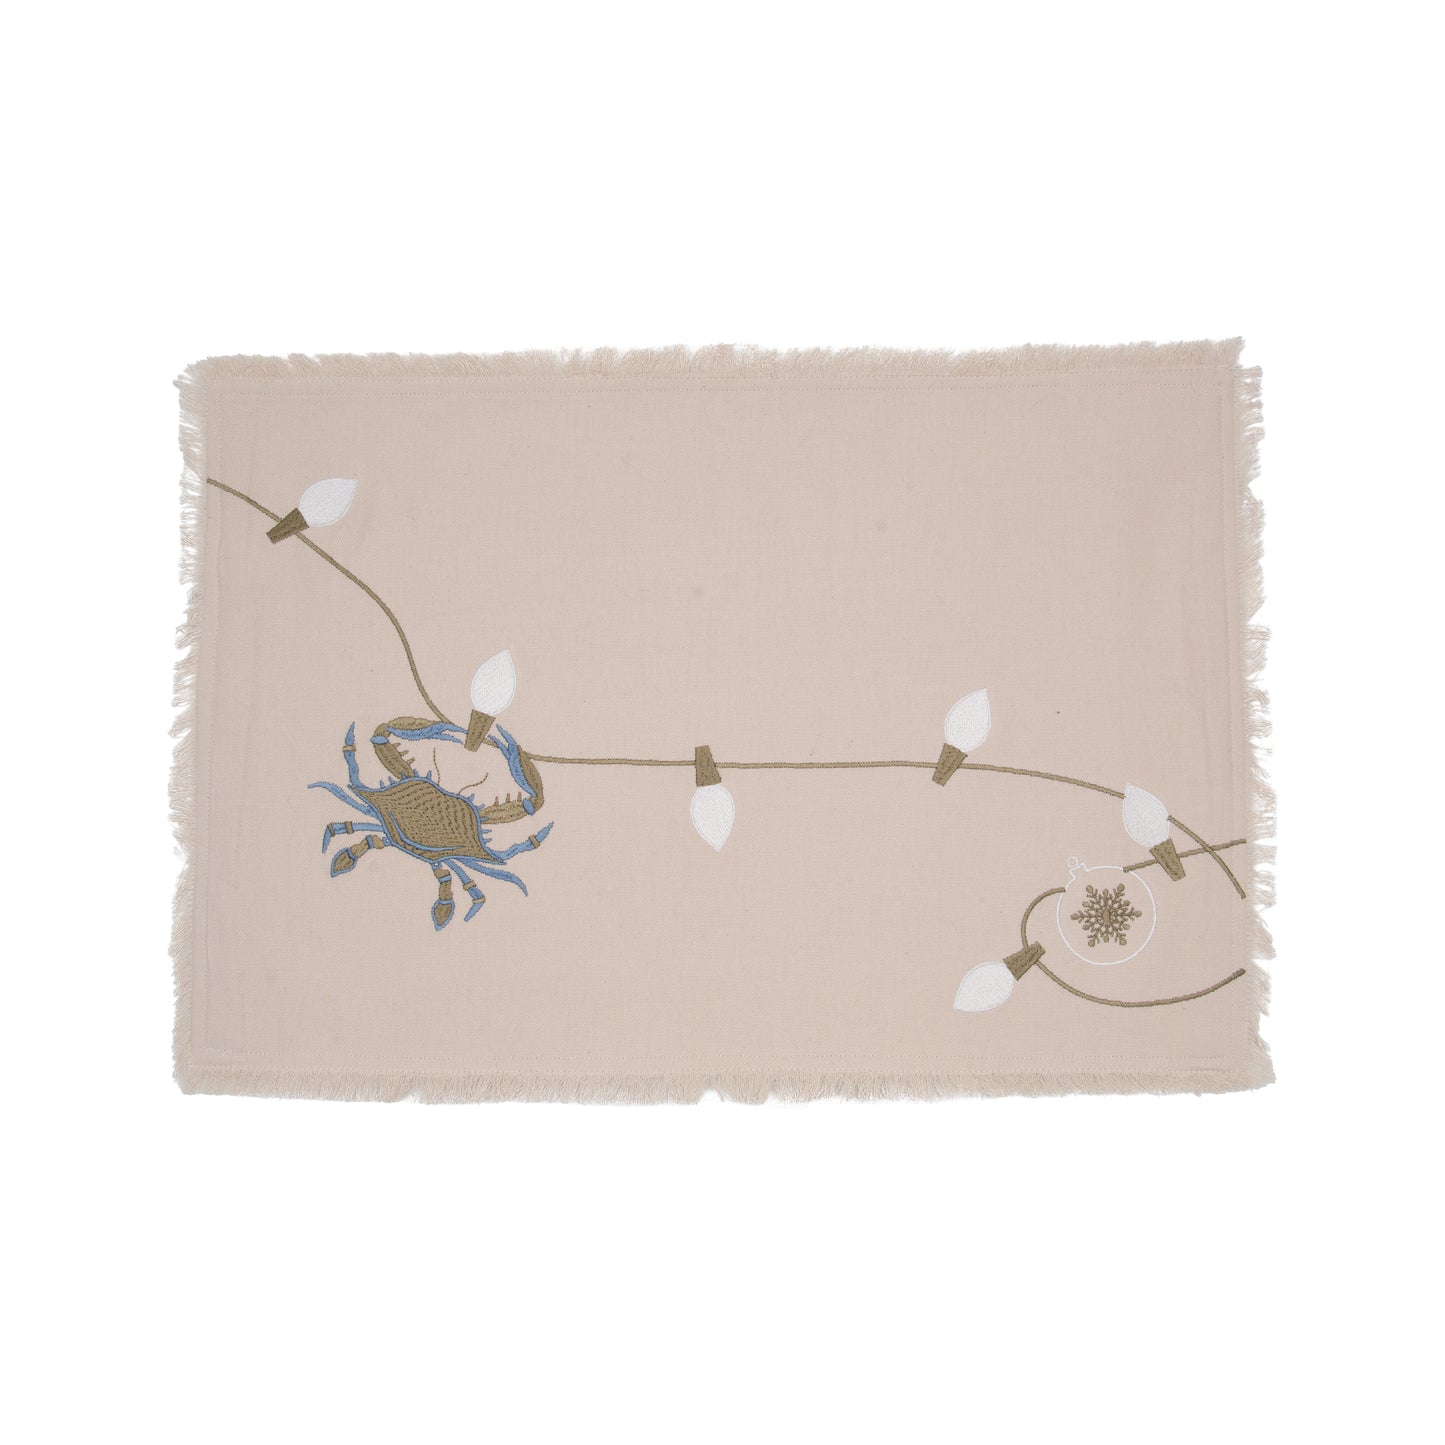 Blue crab and holiday lights embroidered on natural cotton placemat with fringed edges. 